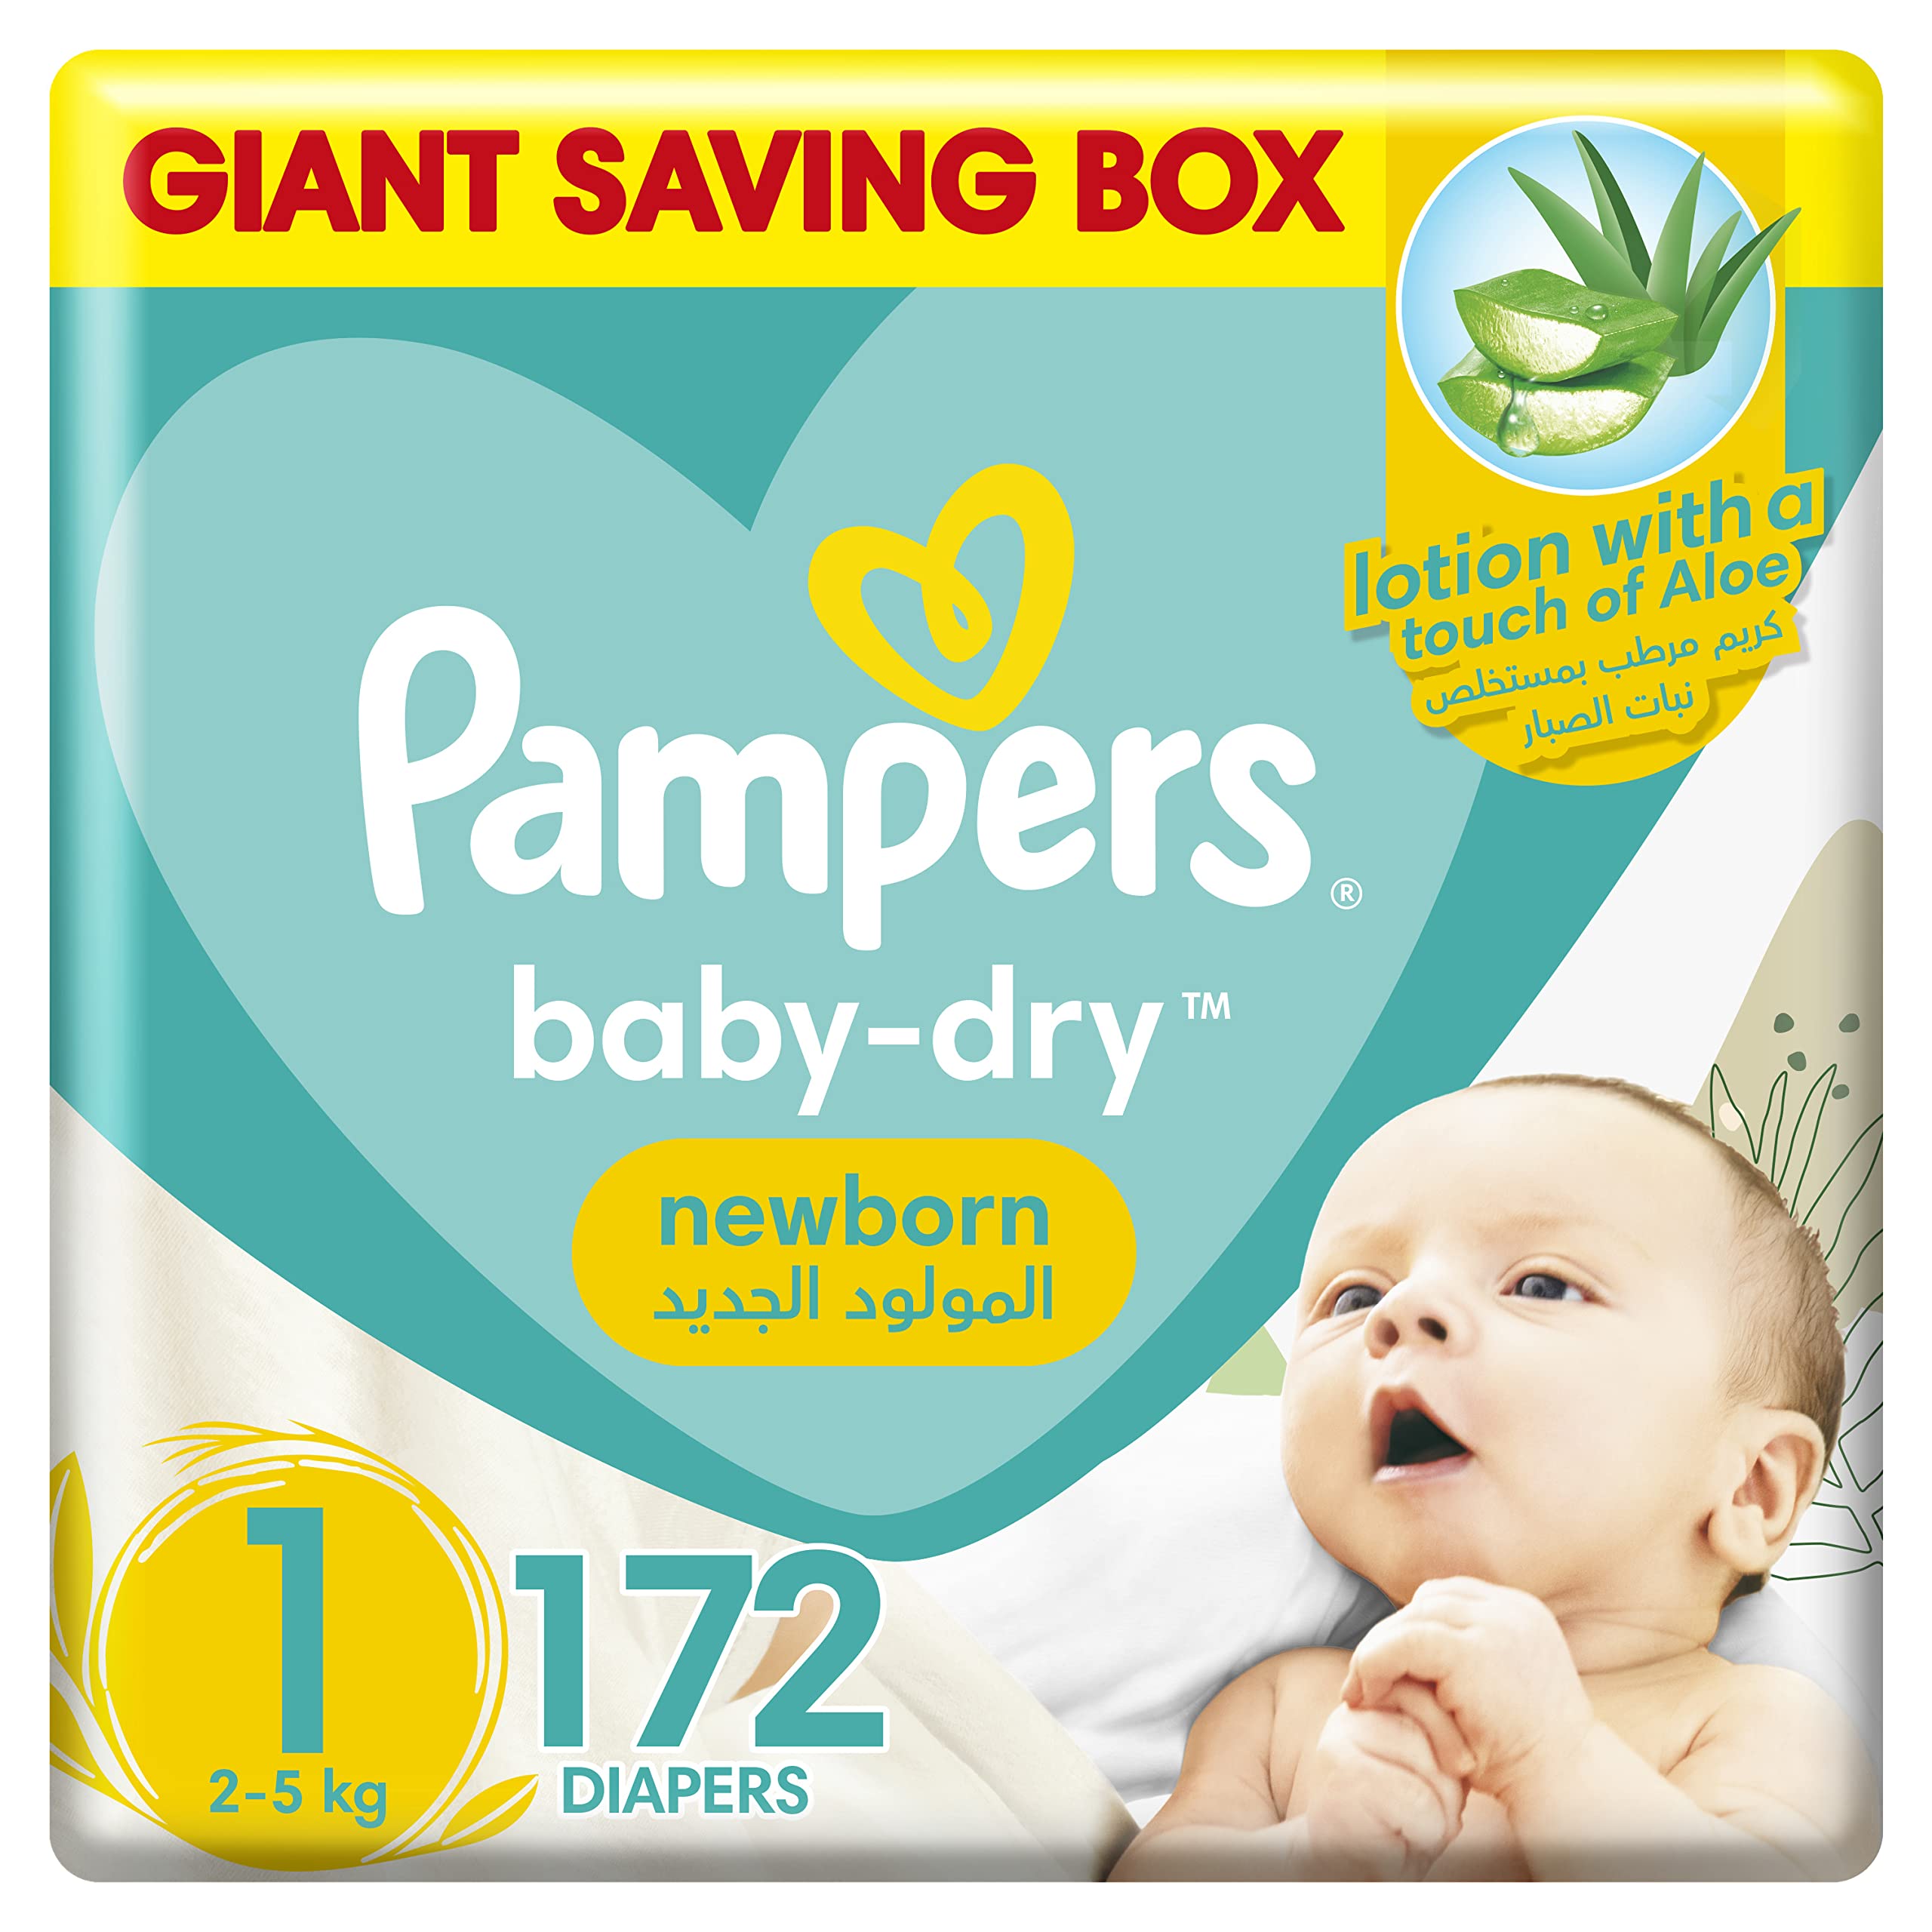 chust pampers new baby sens 54 szt